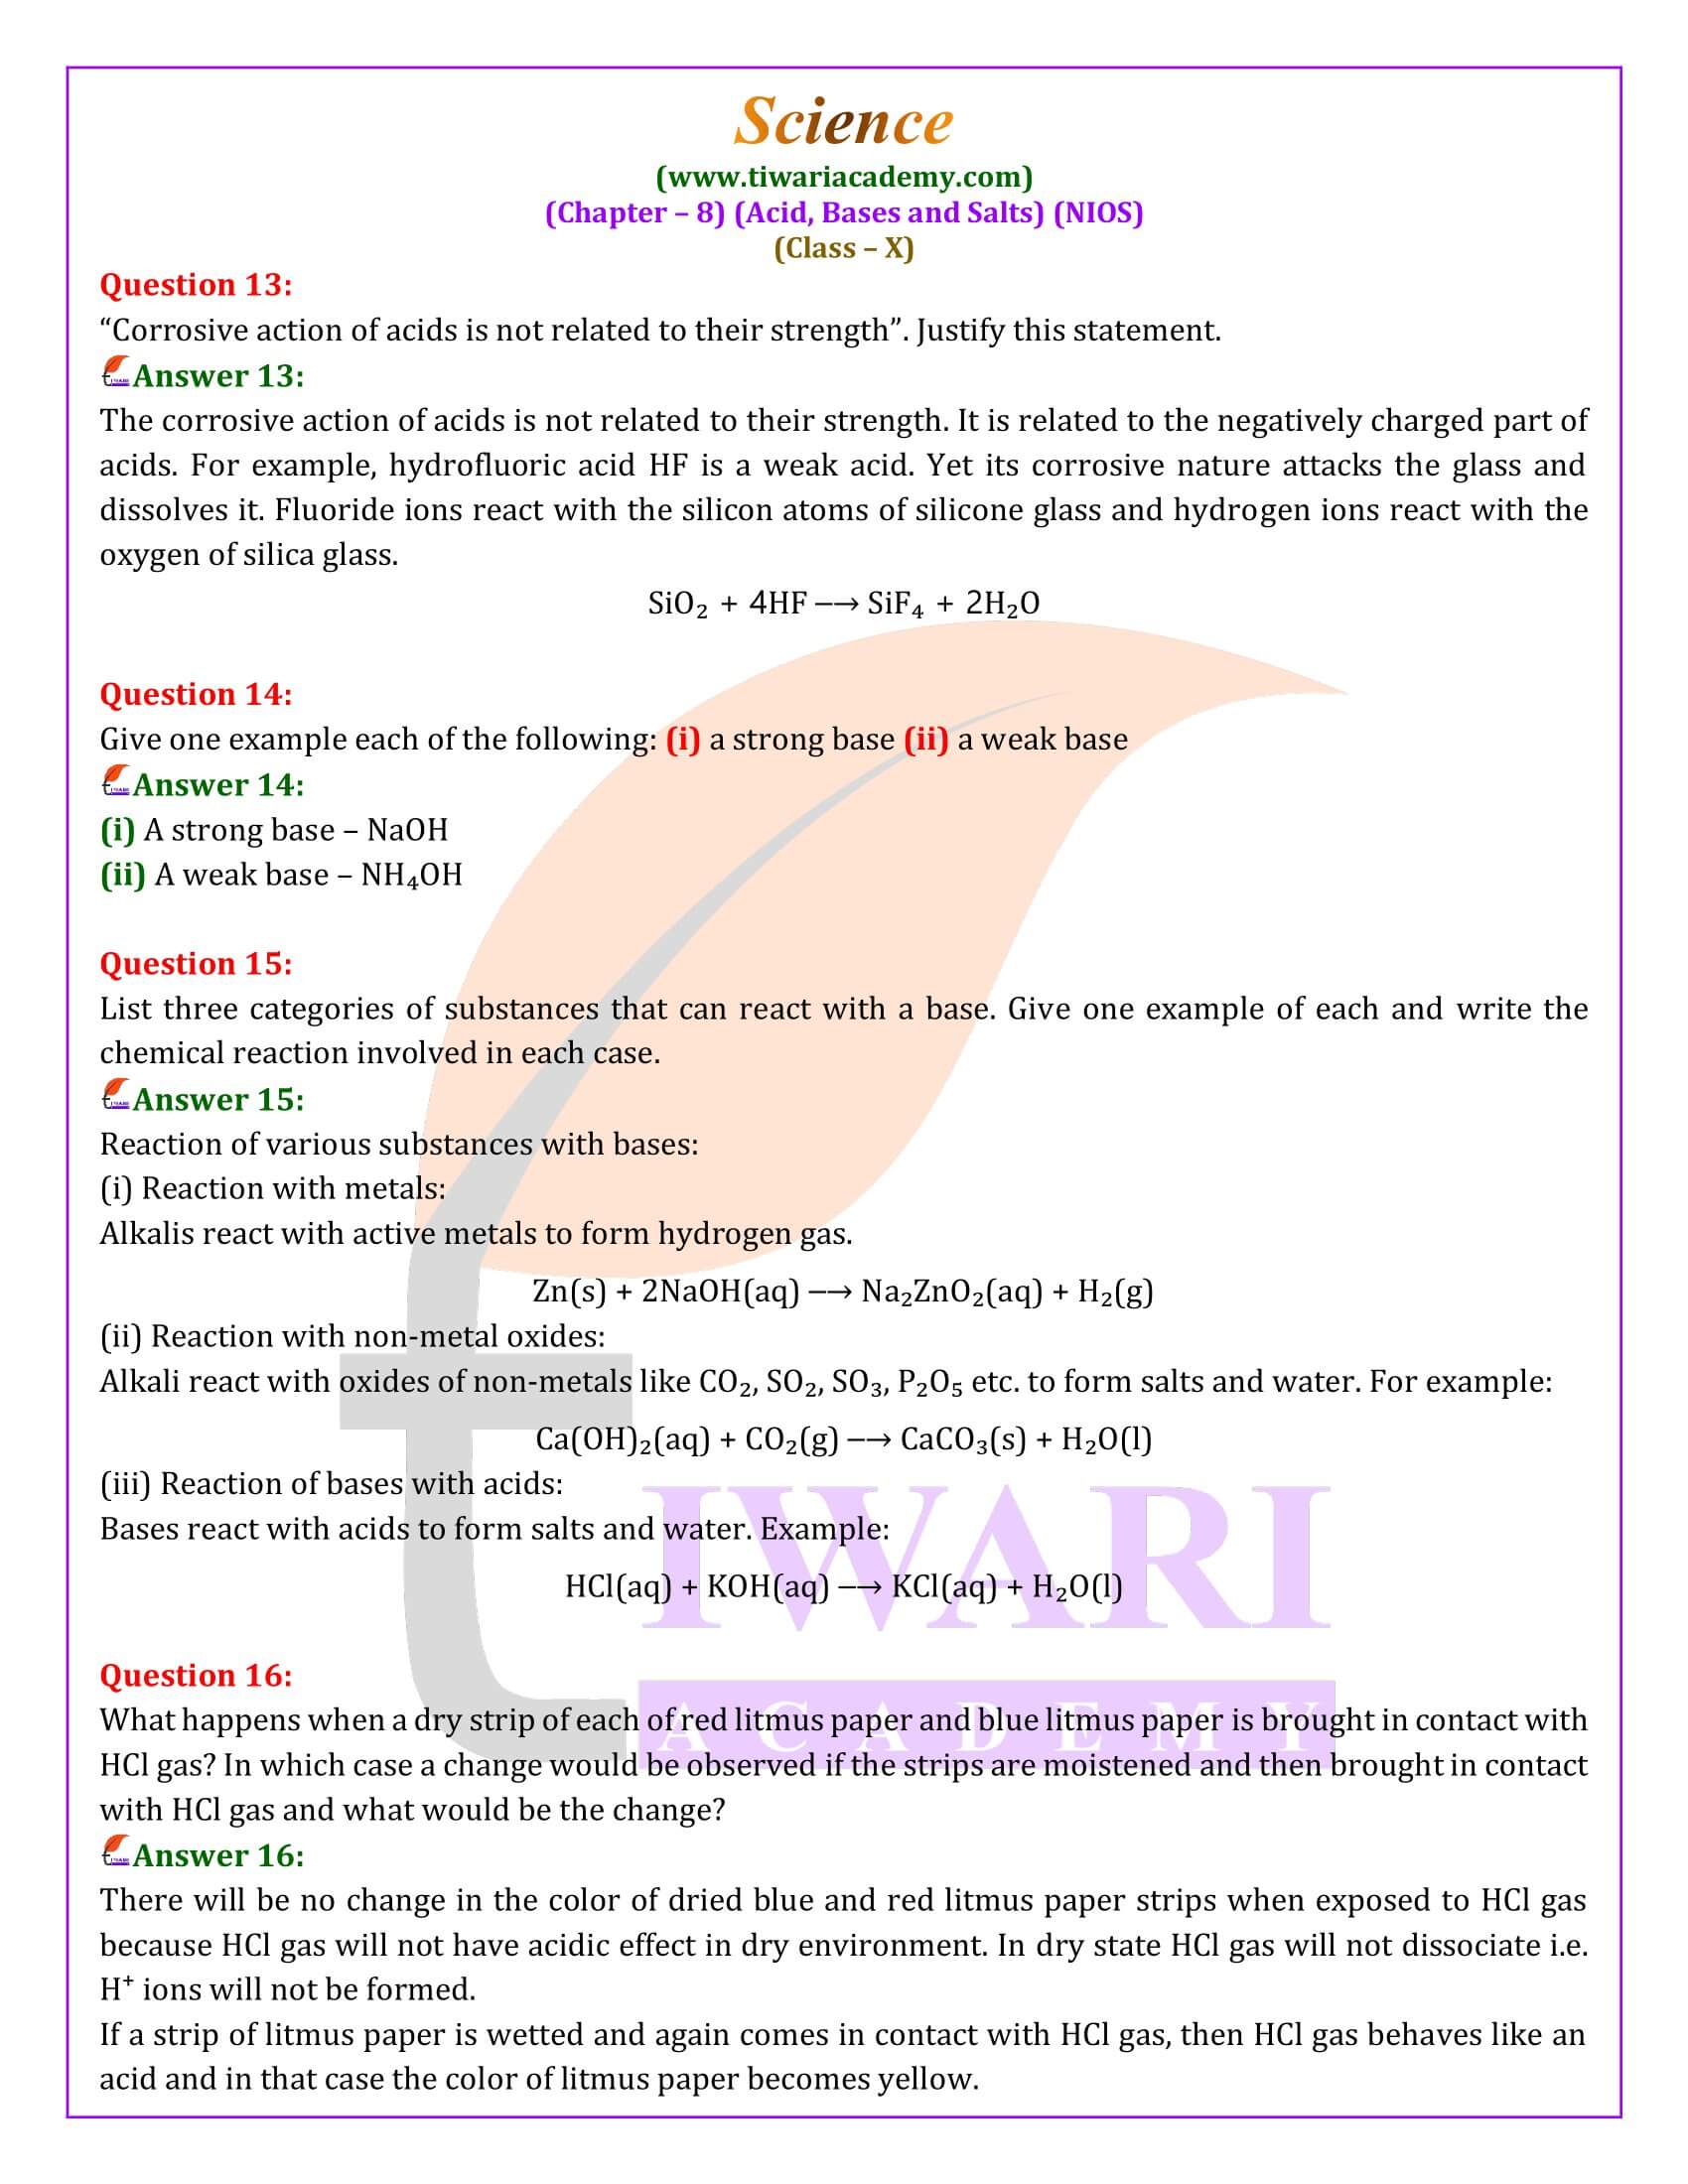 NIOS Class 10 Science Chapter 8 all Question Answers